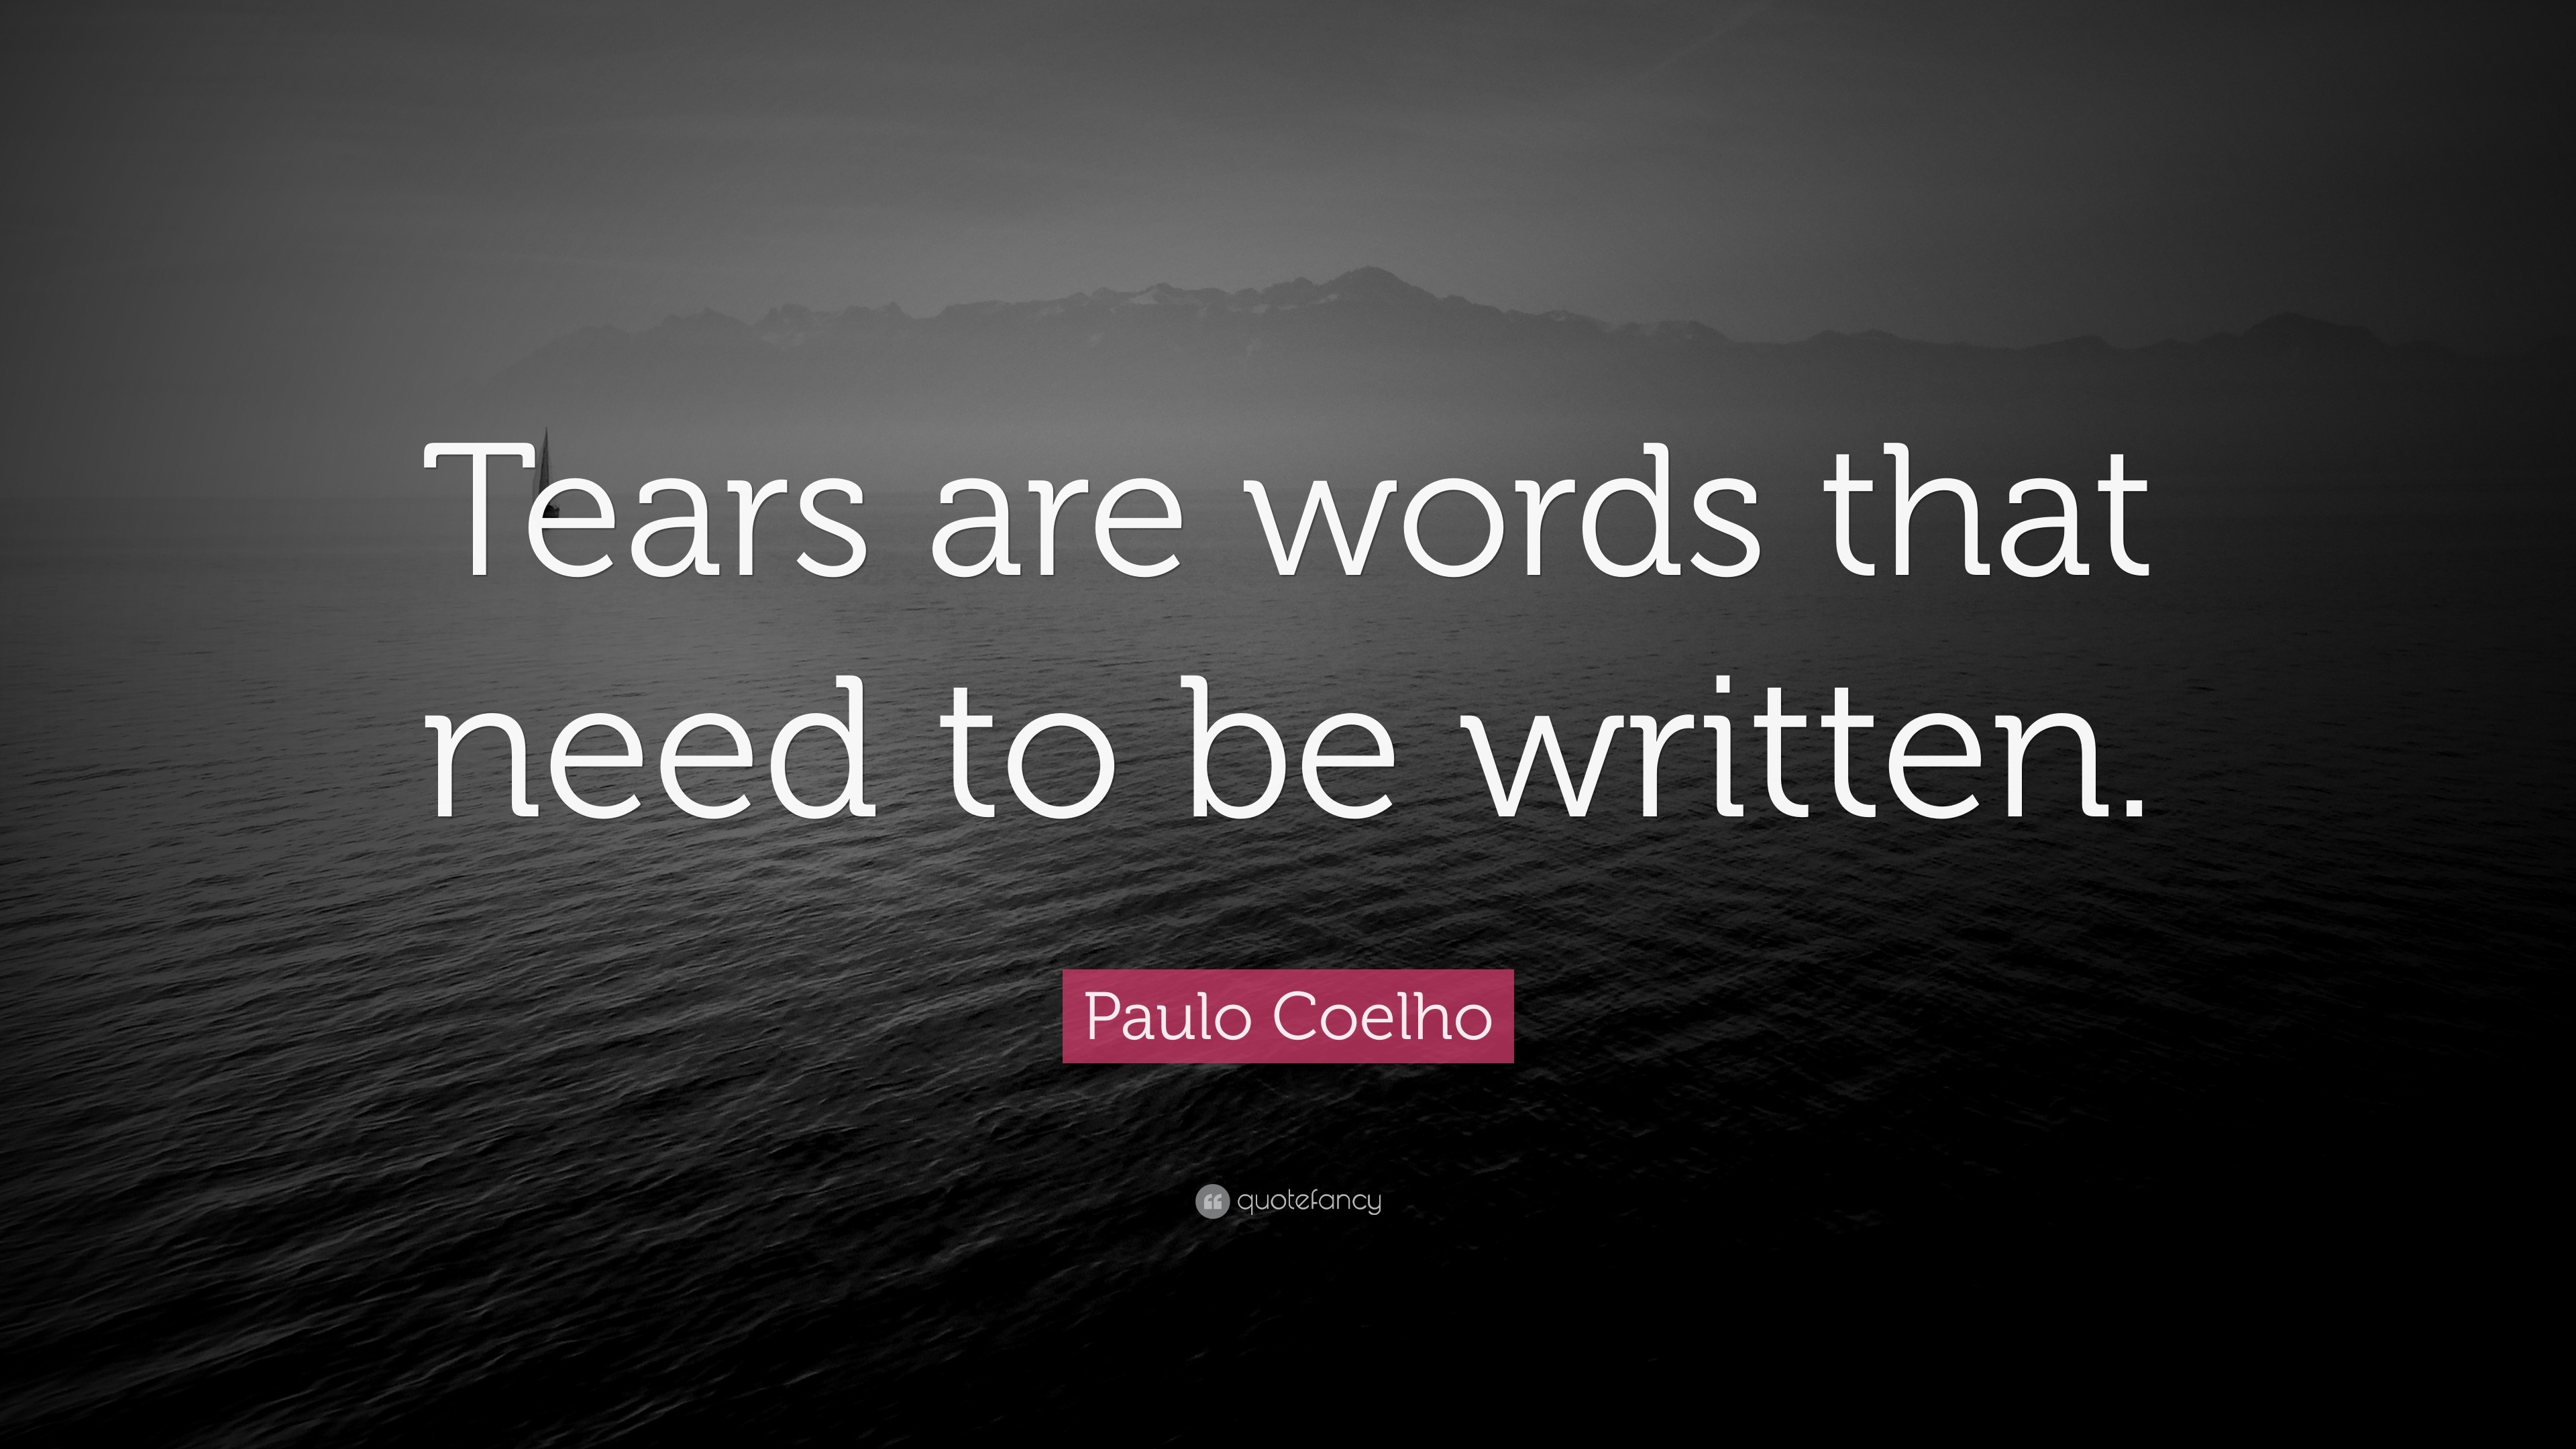 3840x2160 Paulo Coelho Quote: “Tears are words that need to be written.”